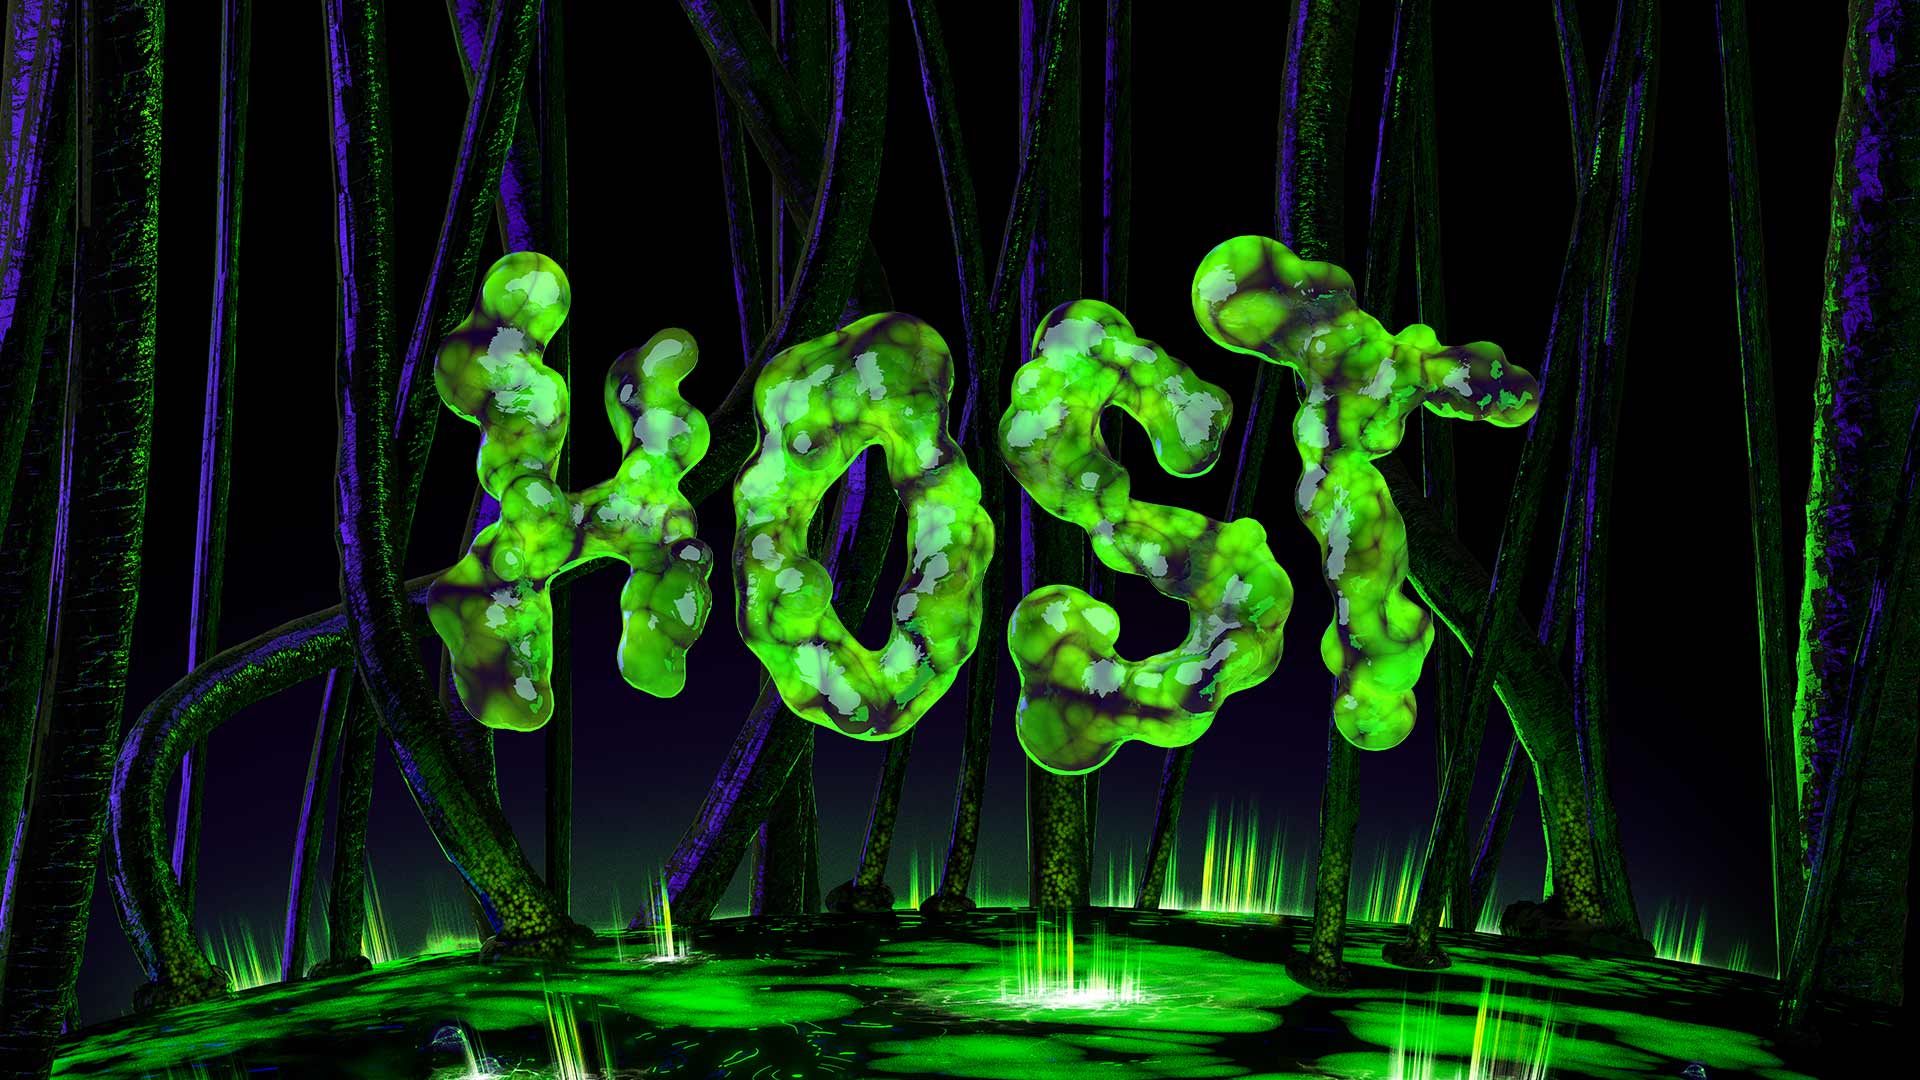 Key art for a video game called HOST with gooey neon green letters in front of a system of veins and tubes